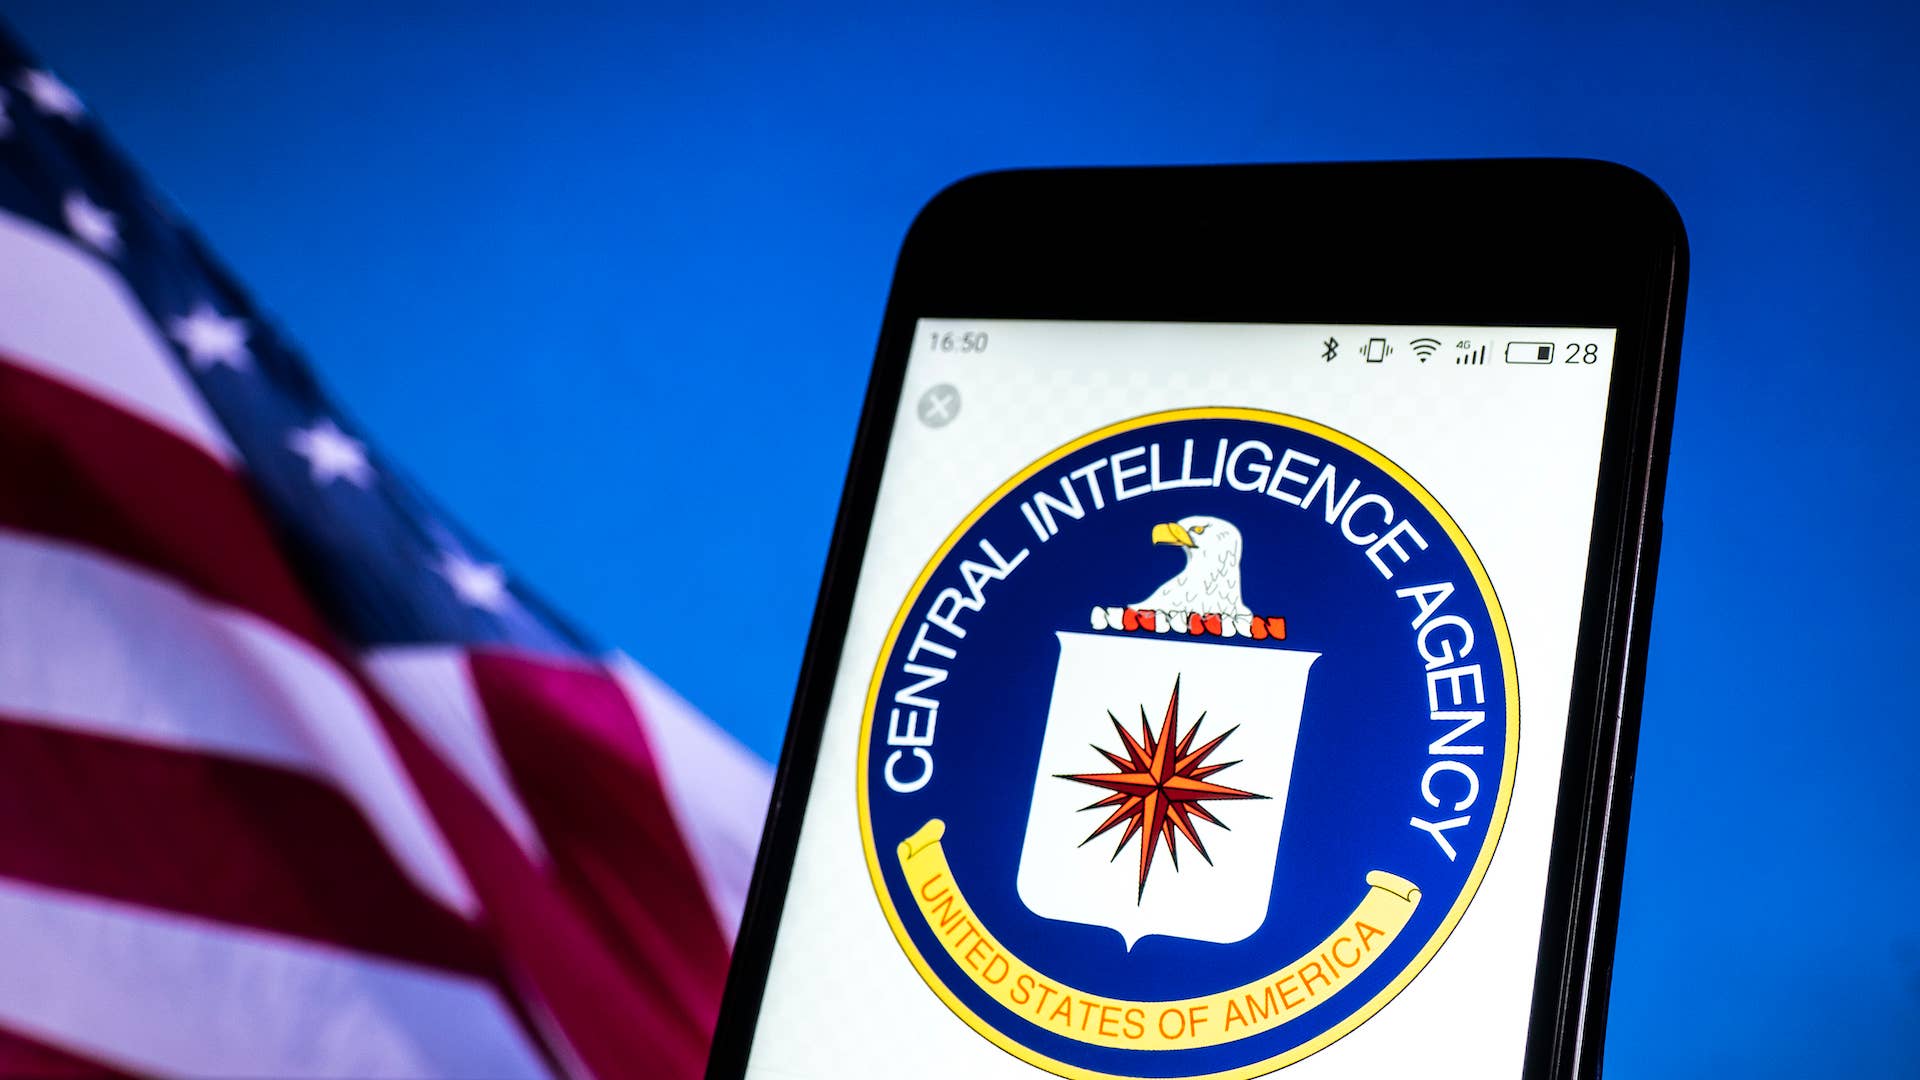 In this photo illustration, the Seal of United States Central Intelligence Agency seen displayed on a smartphone.